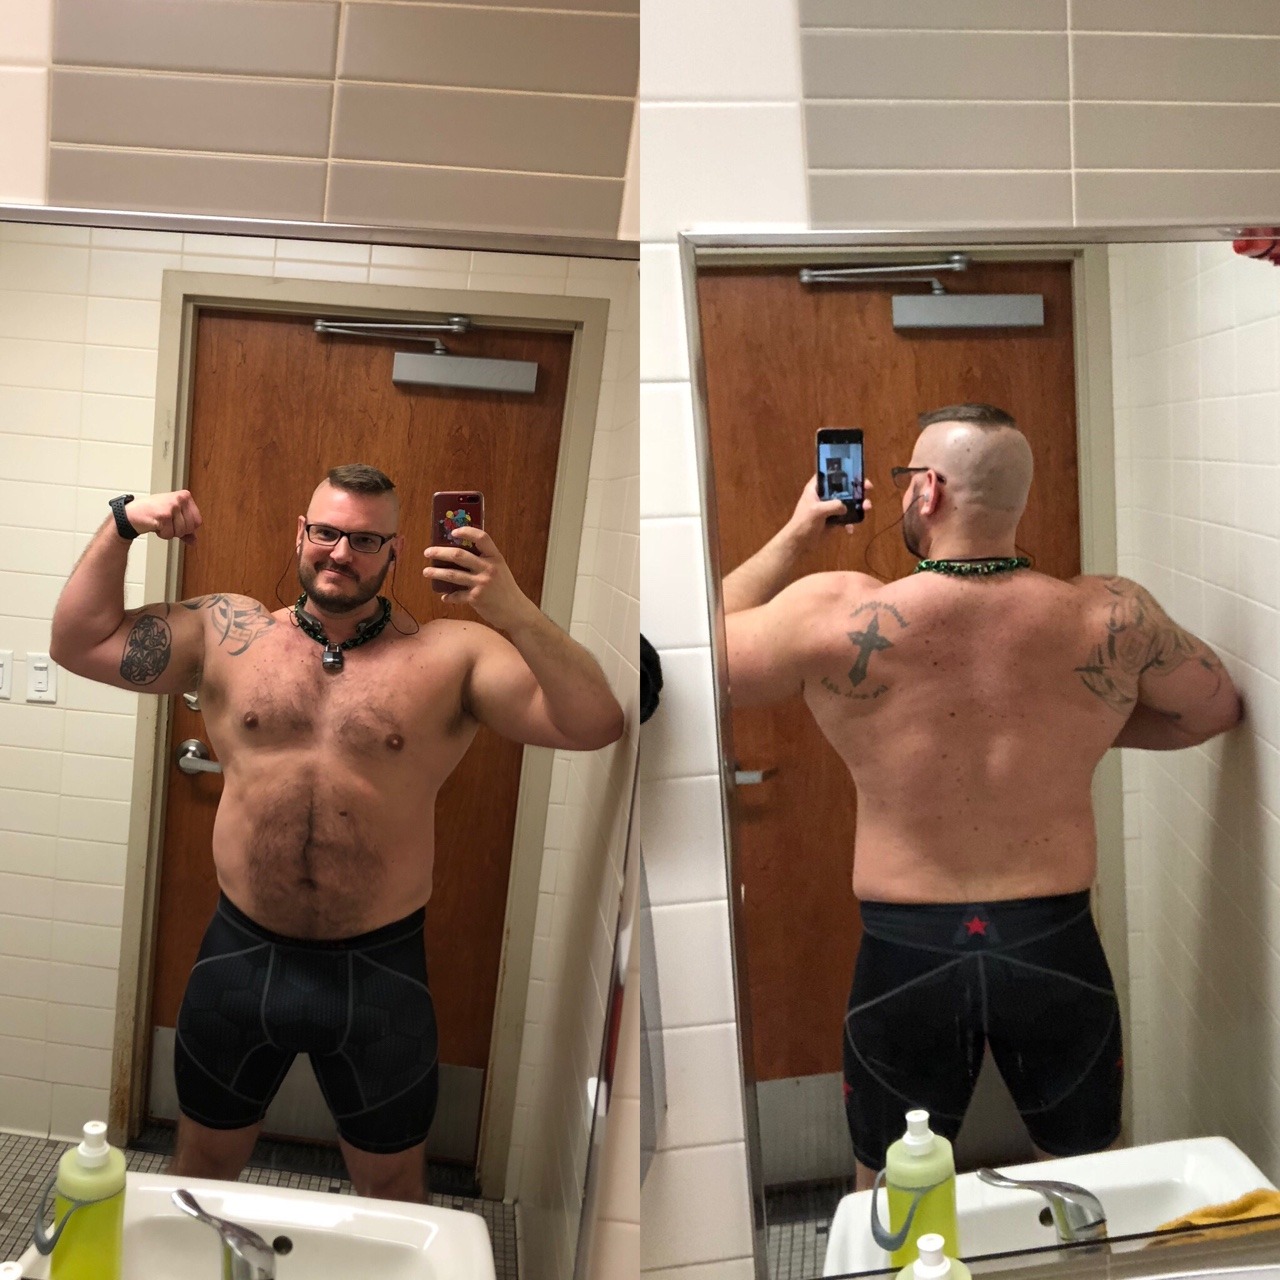 pleep1: Not flexing vs flexing… turning into a thicc musclebear and loving it!